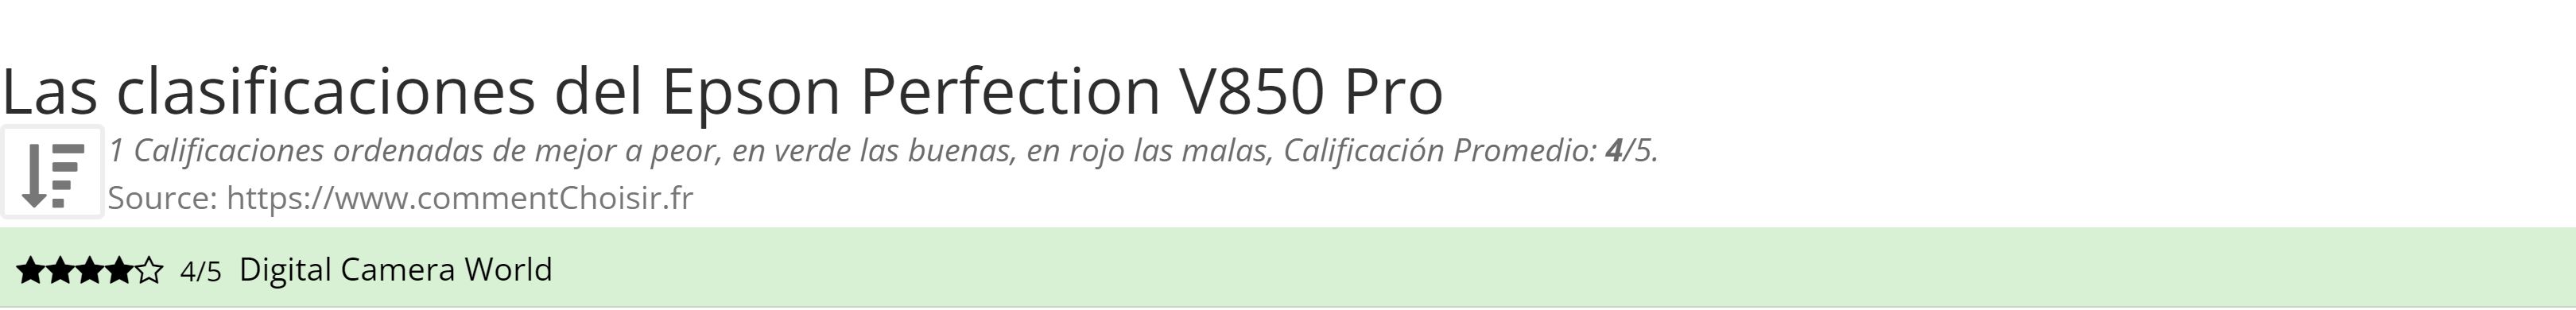 Ratings Epson Perfection V850 Pro